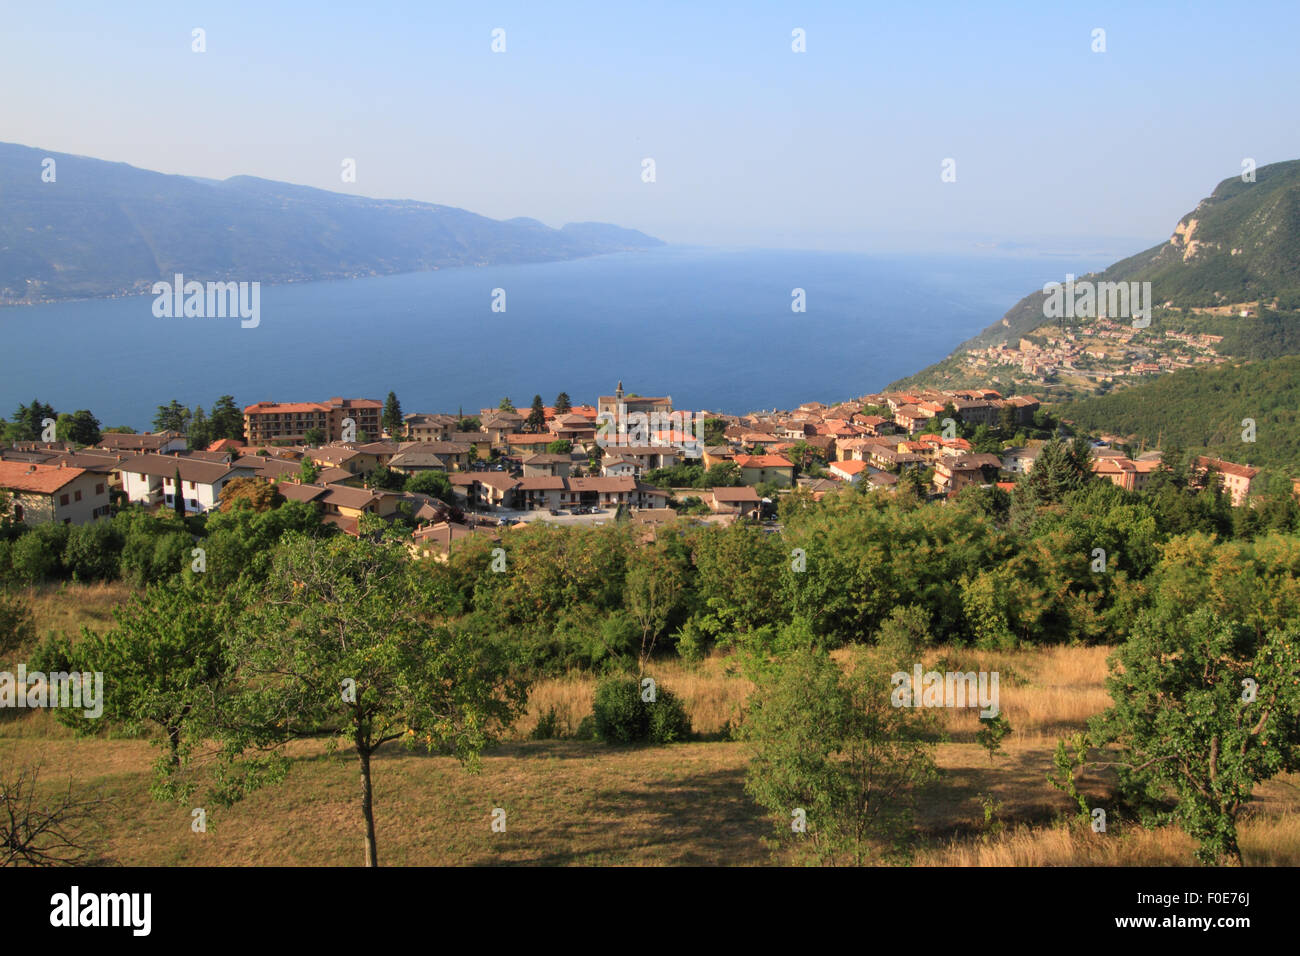 Gardola in Tignale by Lake Garda in Italy. Pair of images photographed just before and just after sunrise (image id F0E76D and F0E76J) Stock Photo